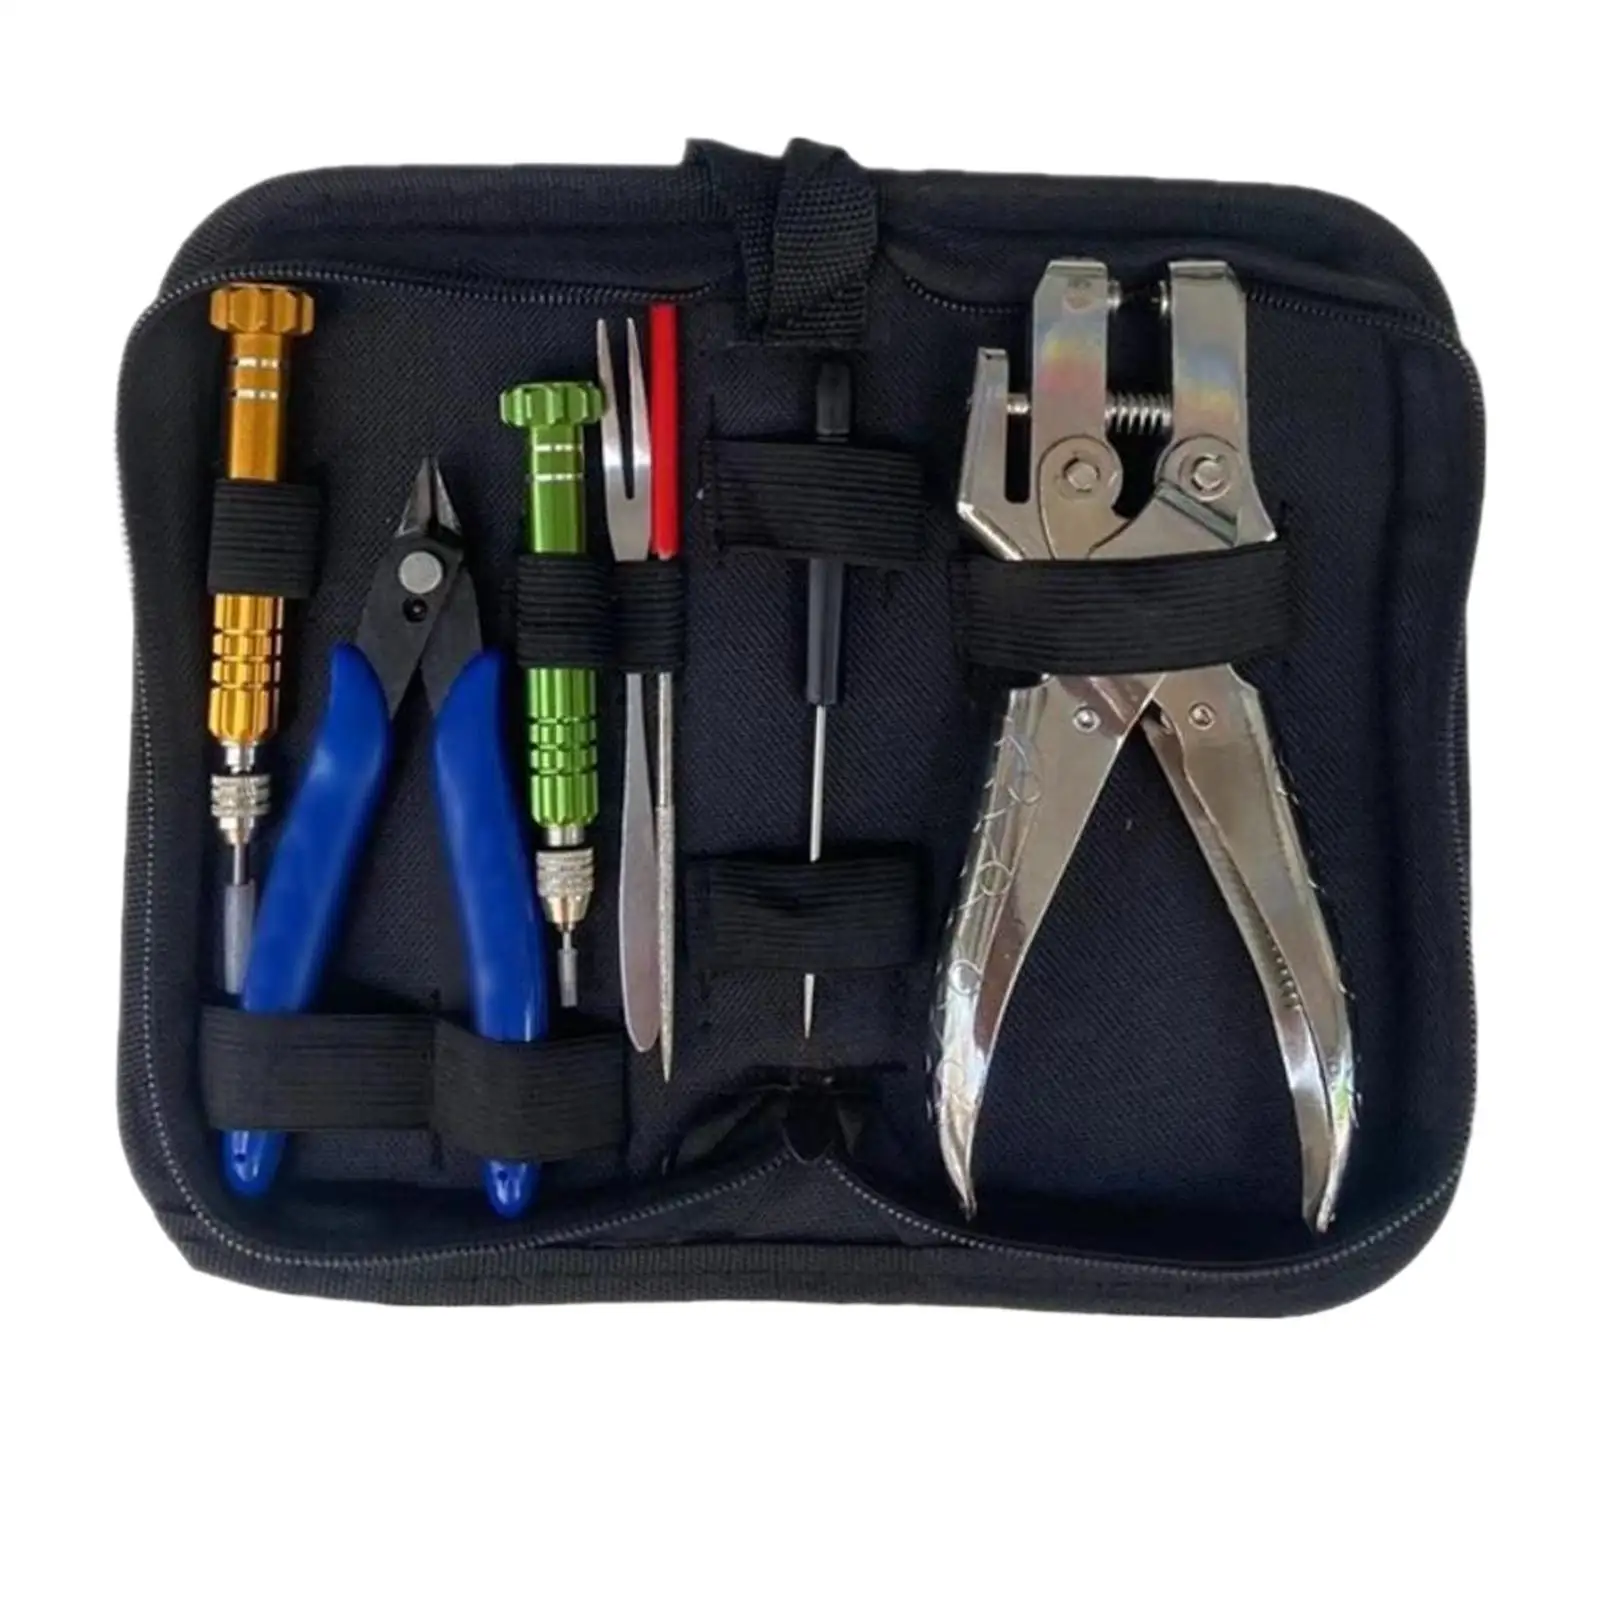 Starting Stringing Clamp Tool Kit, Badminton Racket Plier for Accessories Equipment